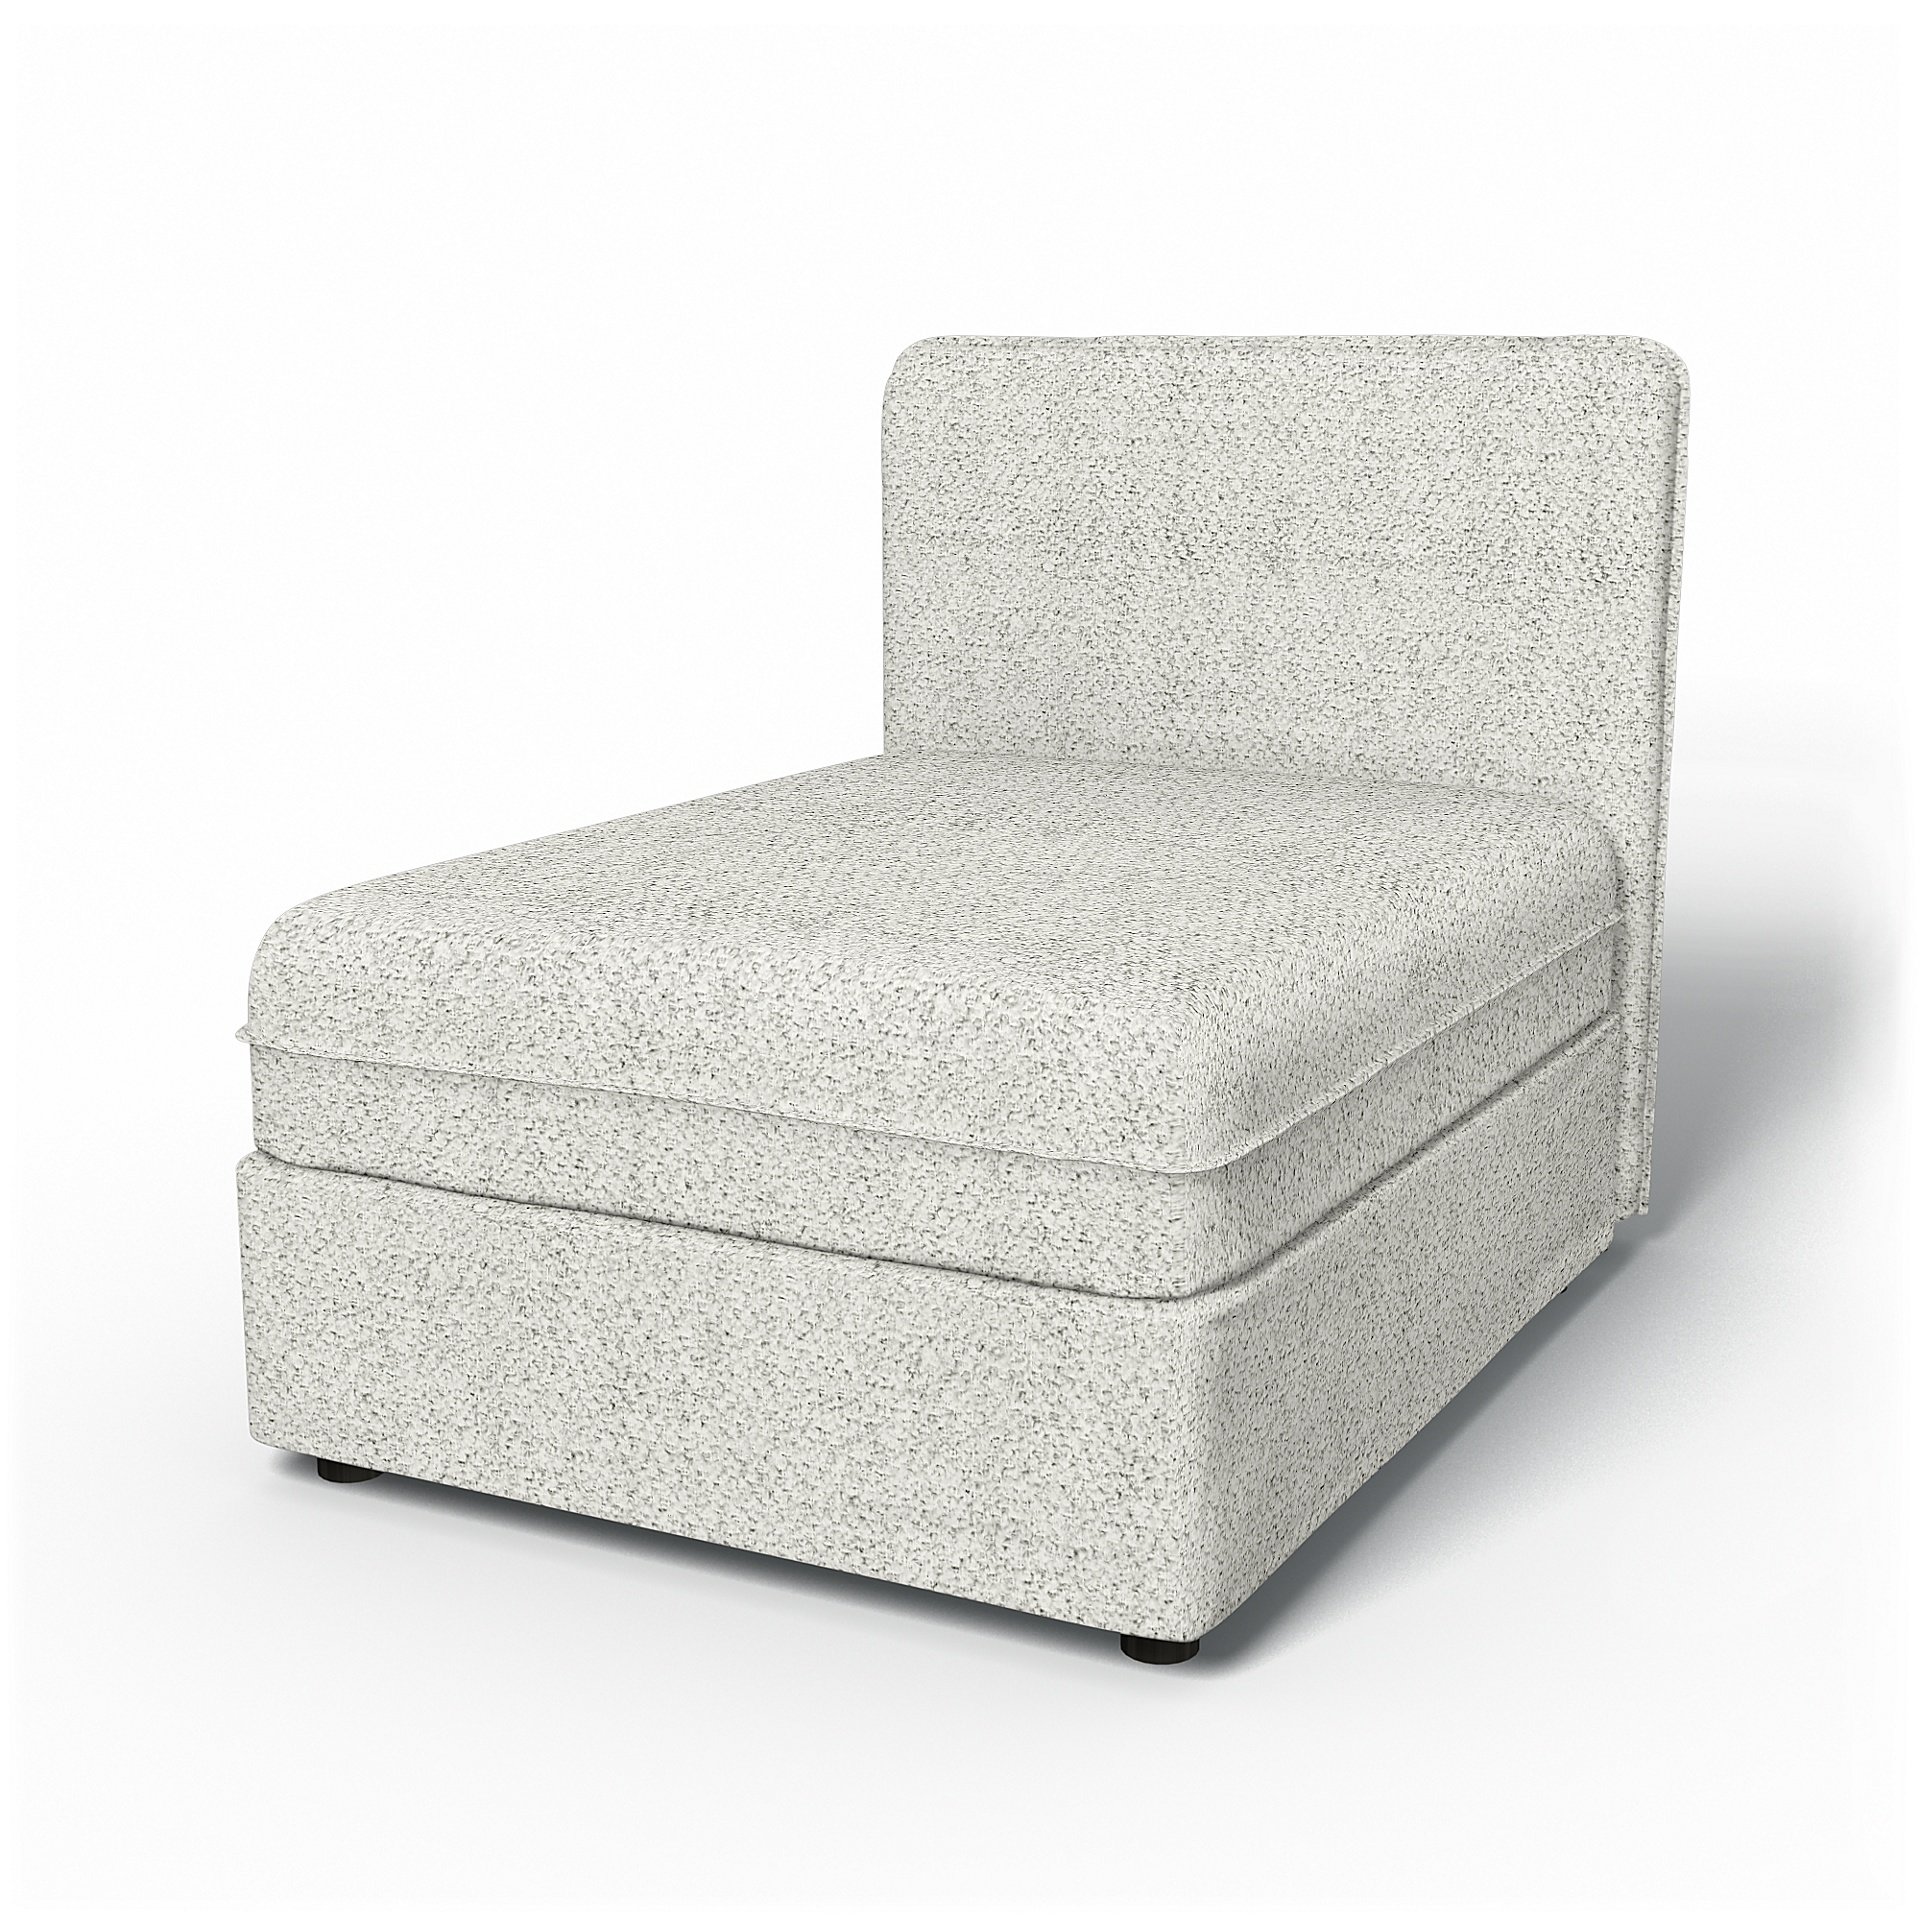 IKEA - Vallentuna Seat Module with Low Back Cover 80x100cm 32x39in, Ivory, Boucle & Texture - Bemz